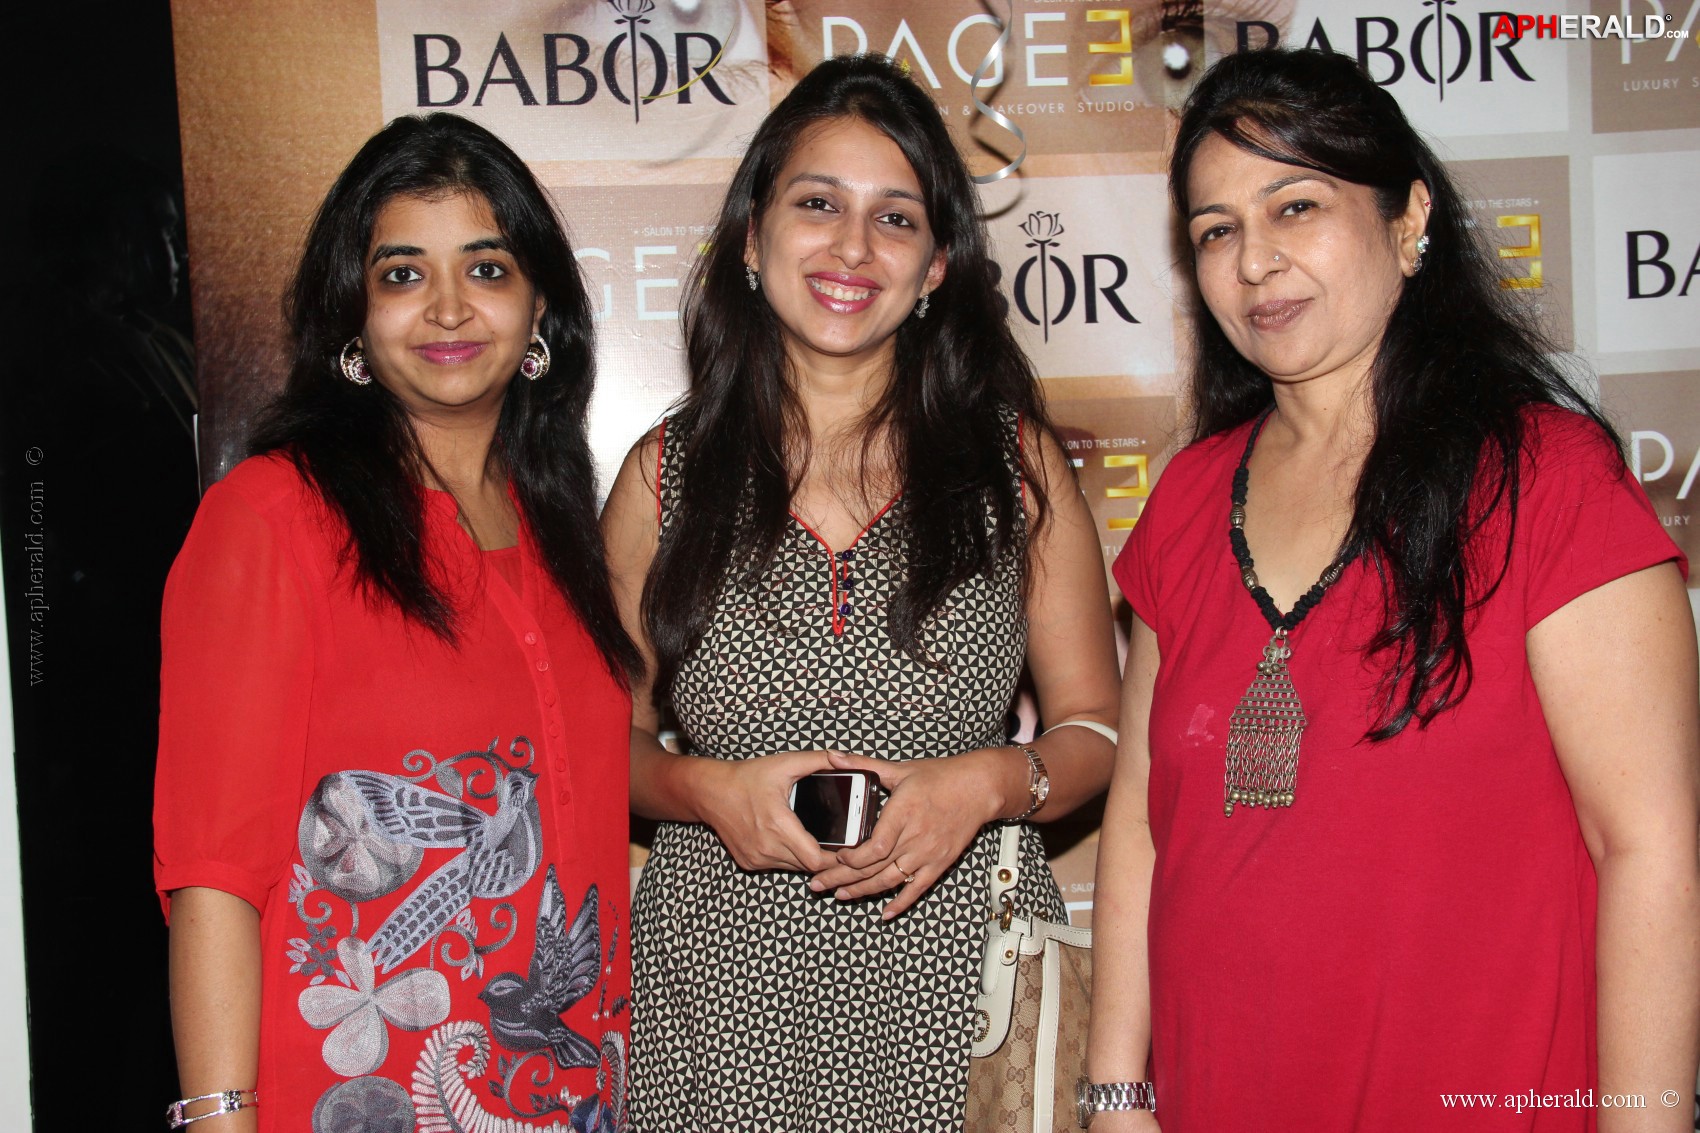 PAGE 3 Luxury Salon launched 'BABOR'